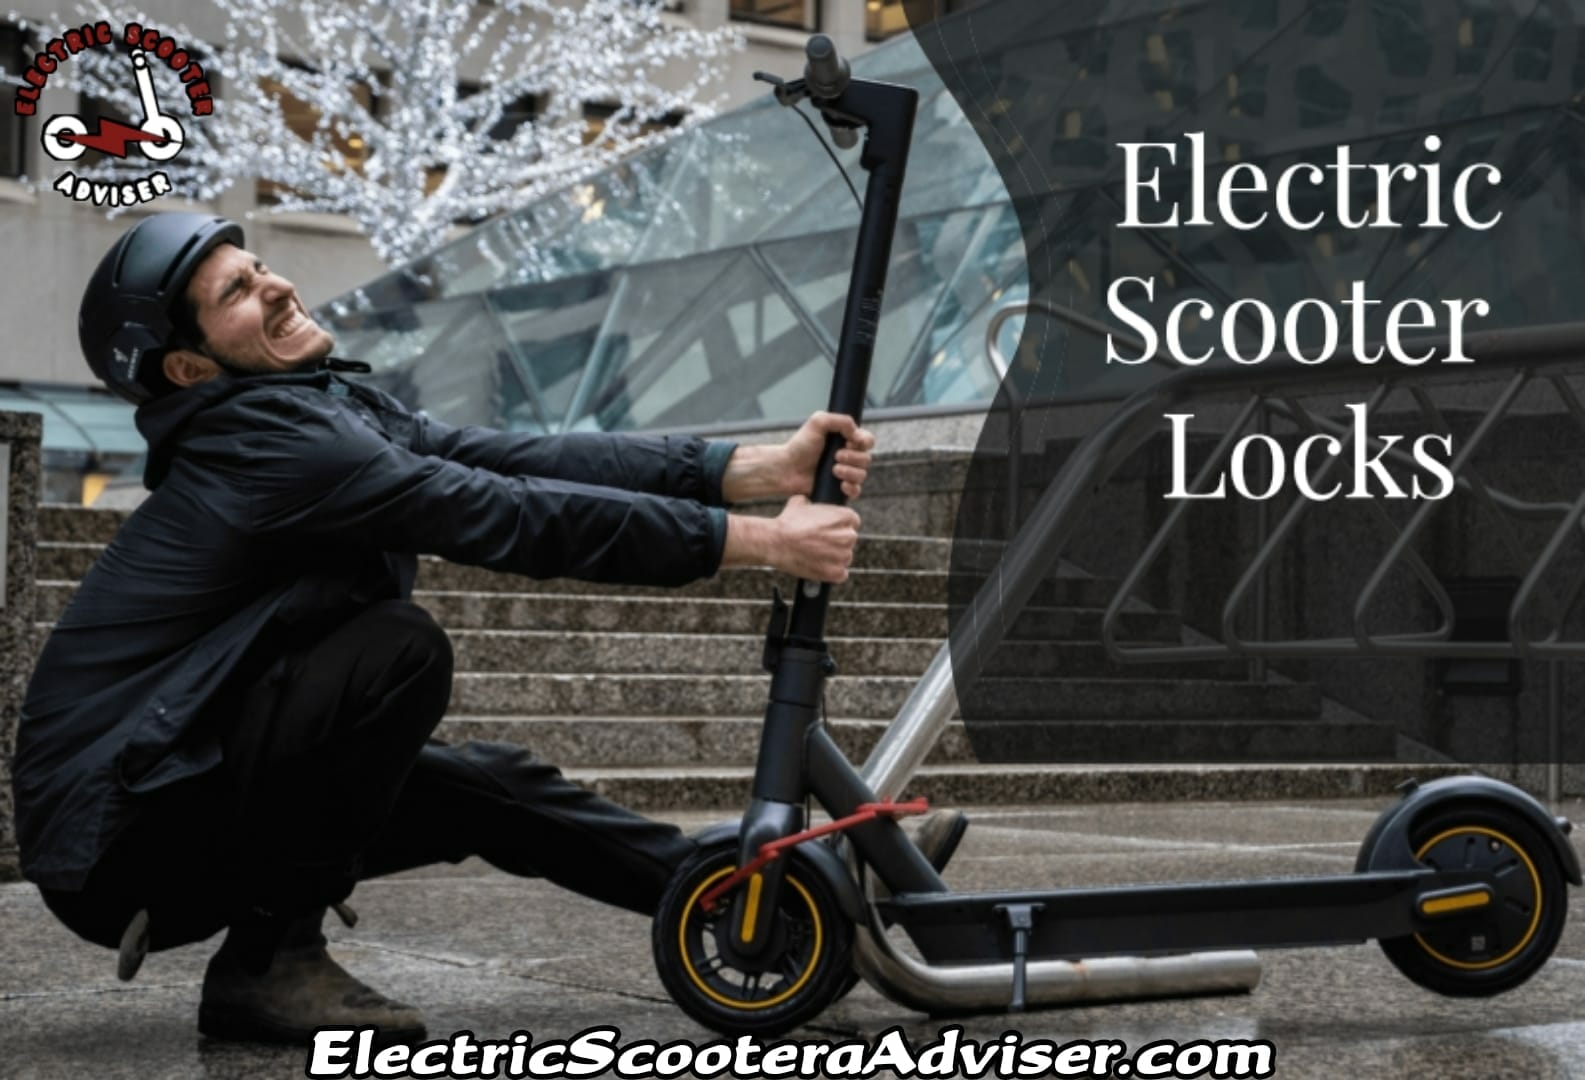 Electric Scooter locks